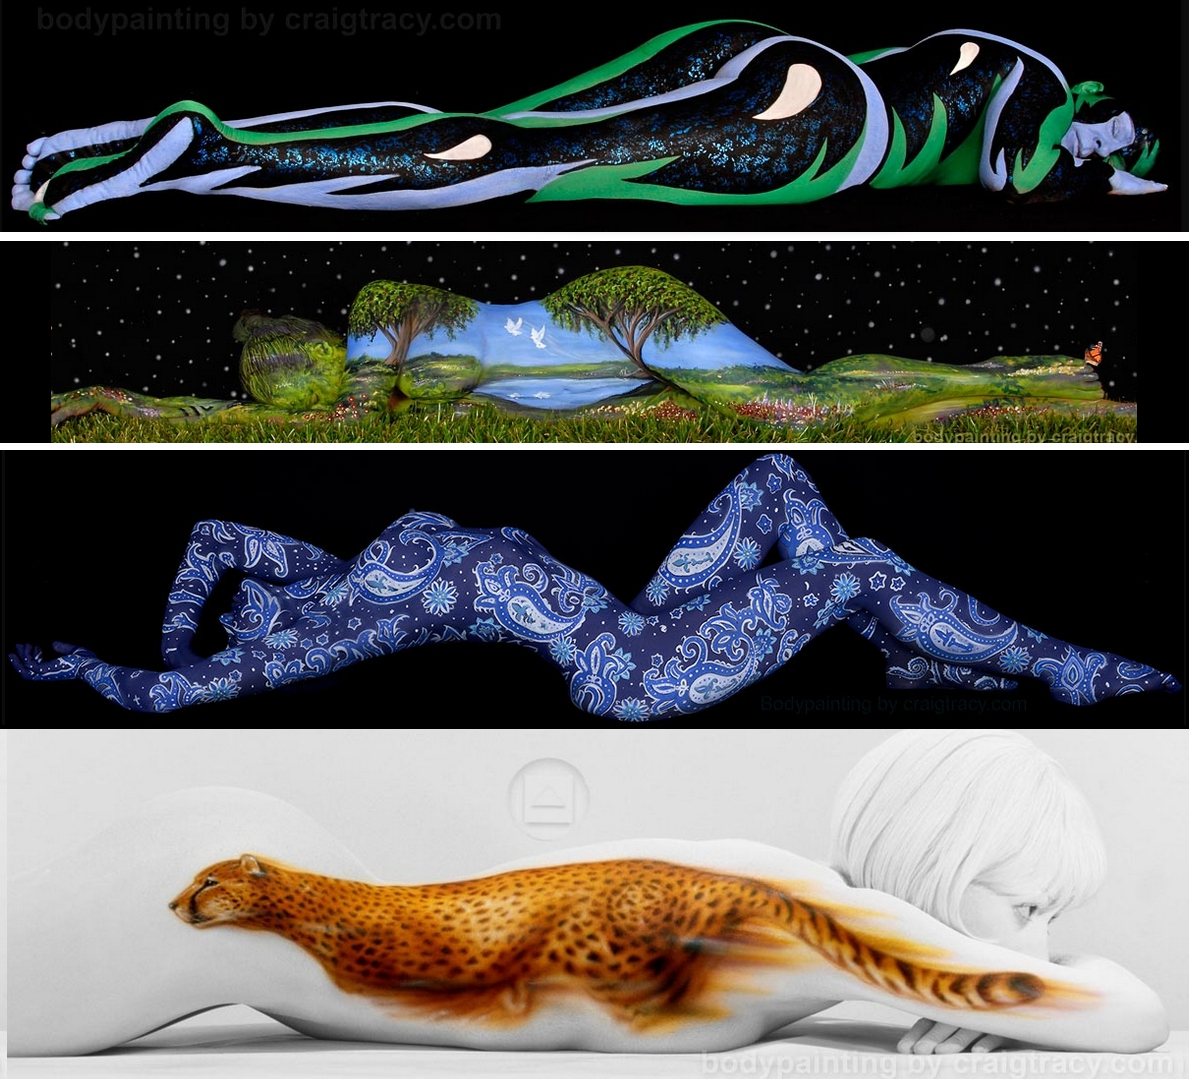 02-Genesis-Craig Tracy-Body-Paintings-on-Skin-Canvases-www-designstack-co